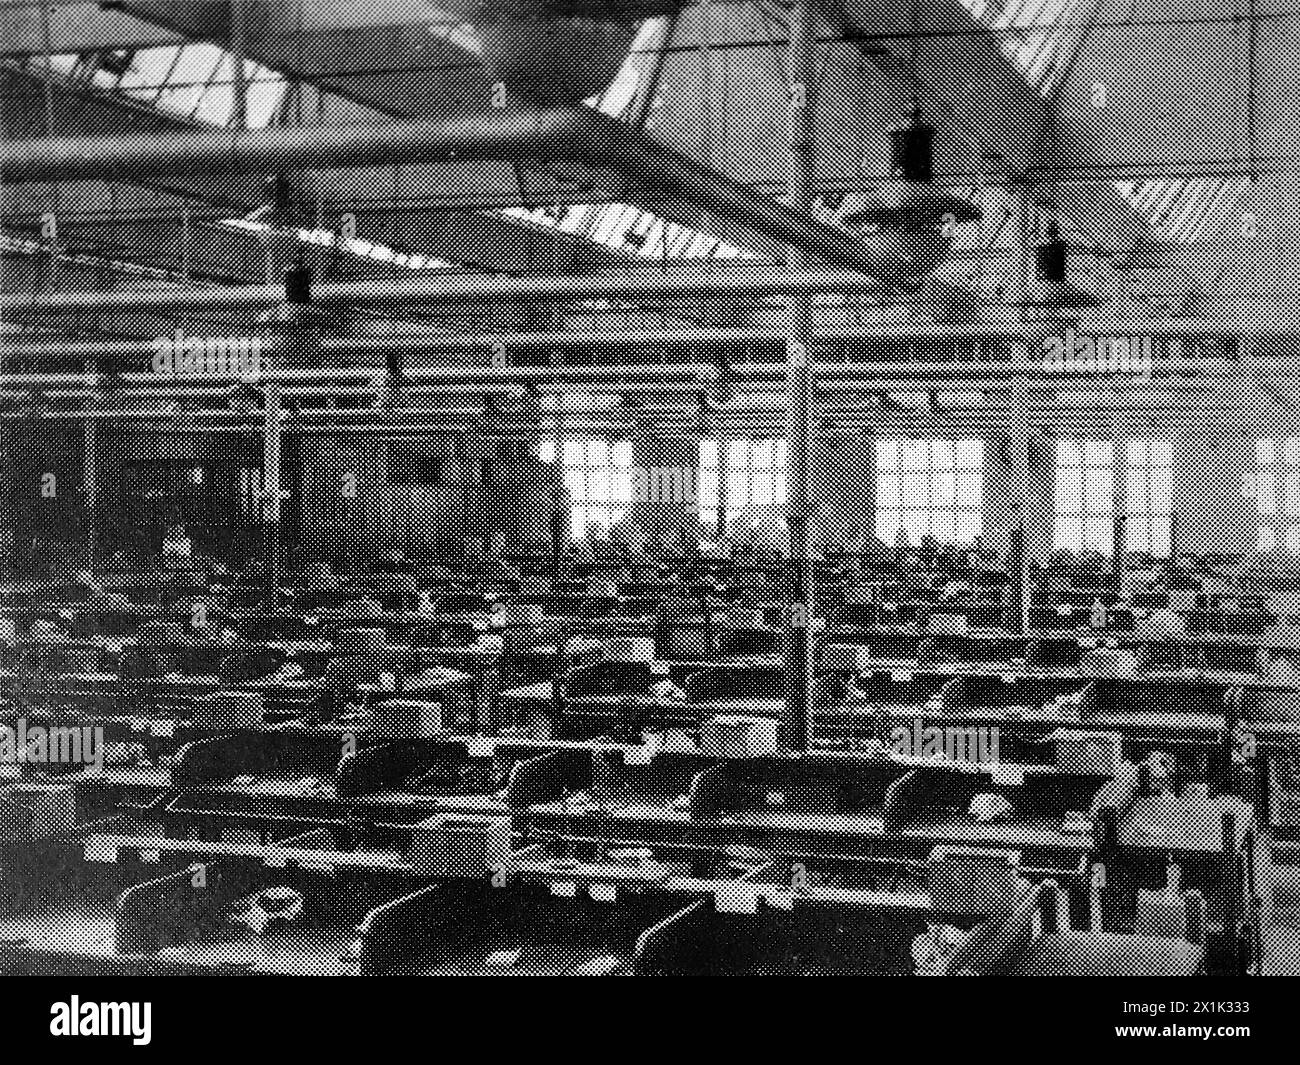 Part of the Hand Made Room at the Swindon factory. Based in Bristol, England, W. D. and H. O. Wills was one of the largest British tobacco products manufacturers. By 1924 they were a part of the Imperial Tobacco Group of Great Britain and Ireland but still had a certain amount of autonomy. The company was also a prolific publisher of cigarette cards. Stock Photo